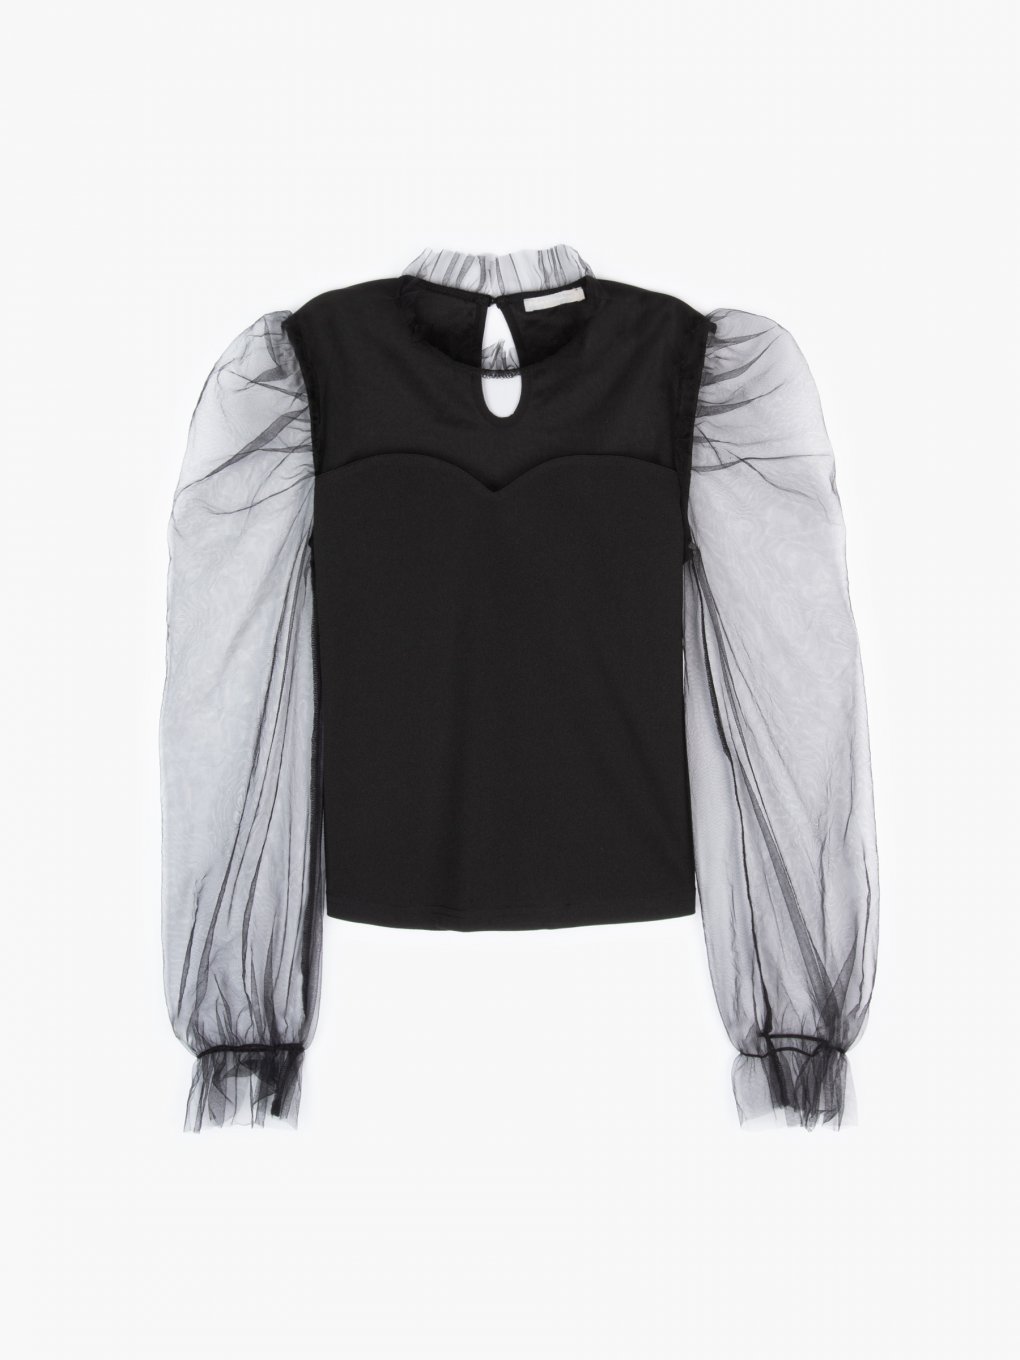 Top with mesh balloon sleeves